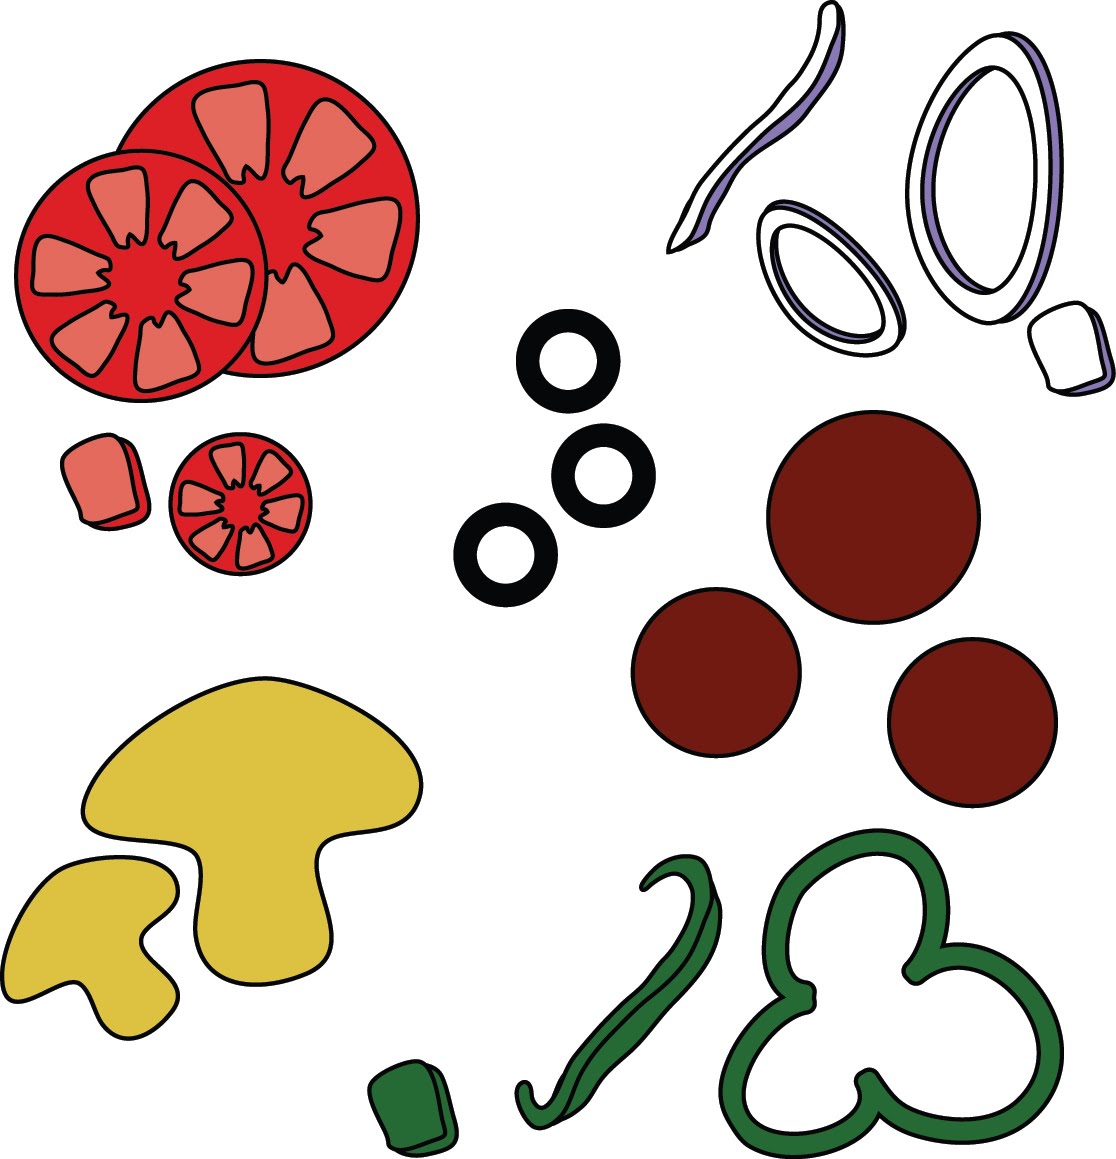 Pizza toppings clipart.